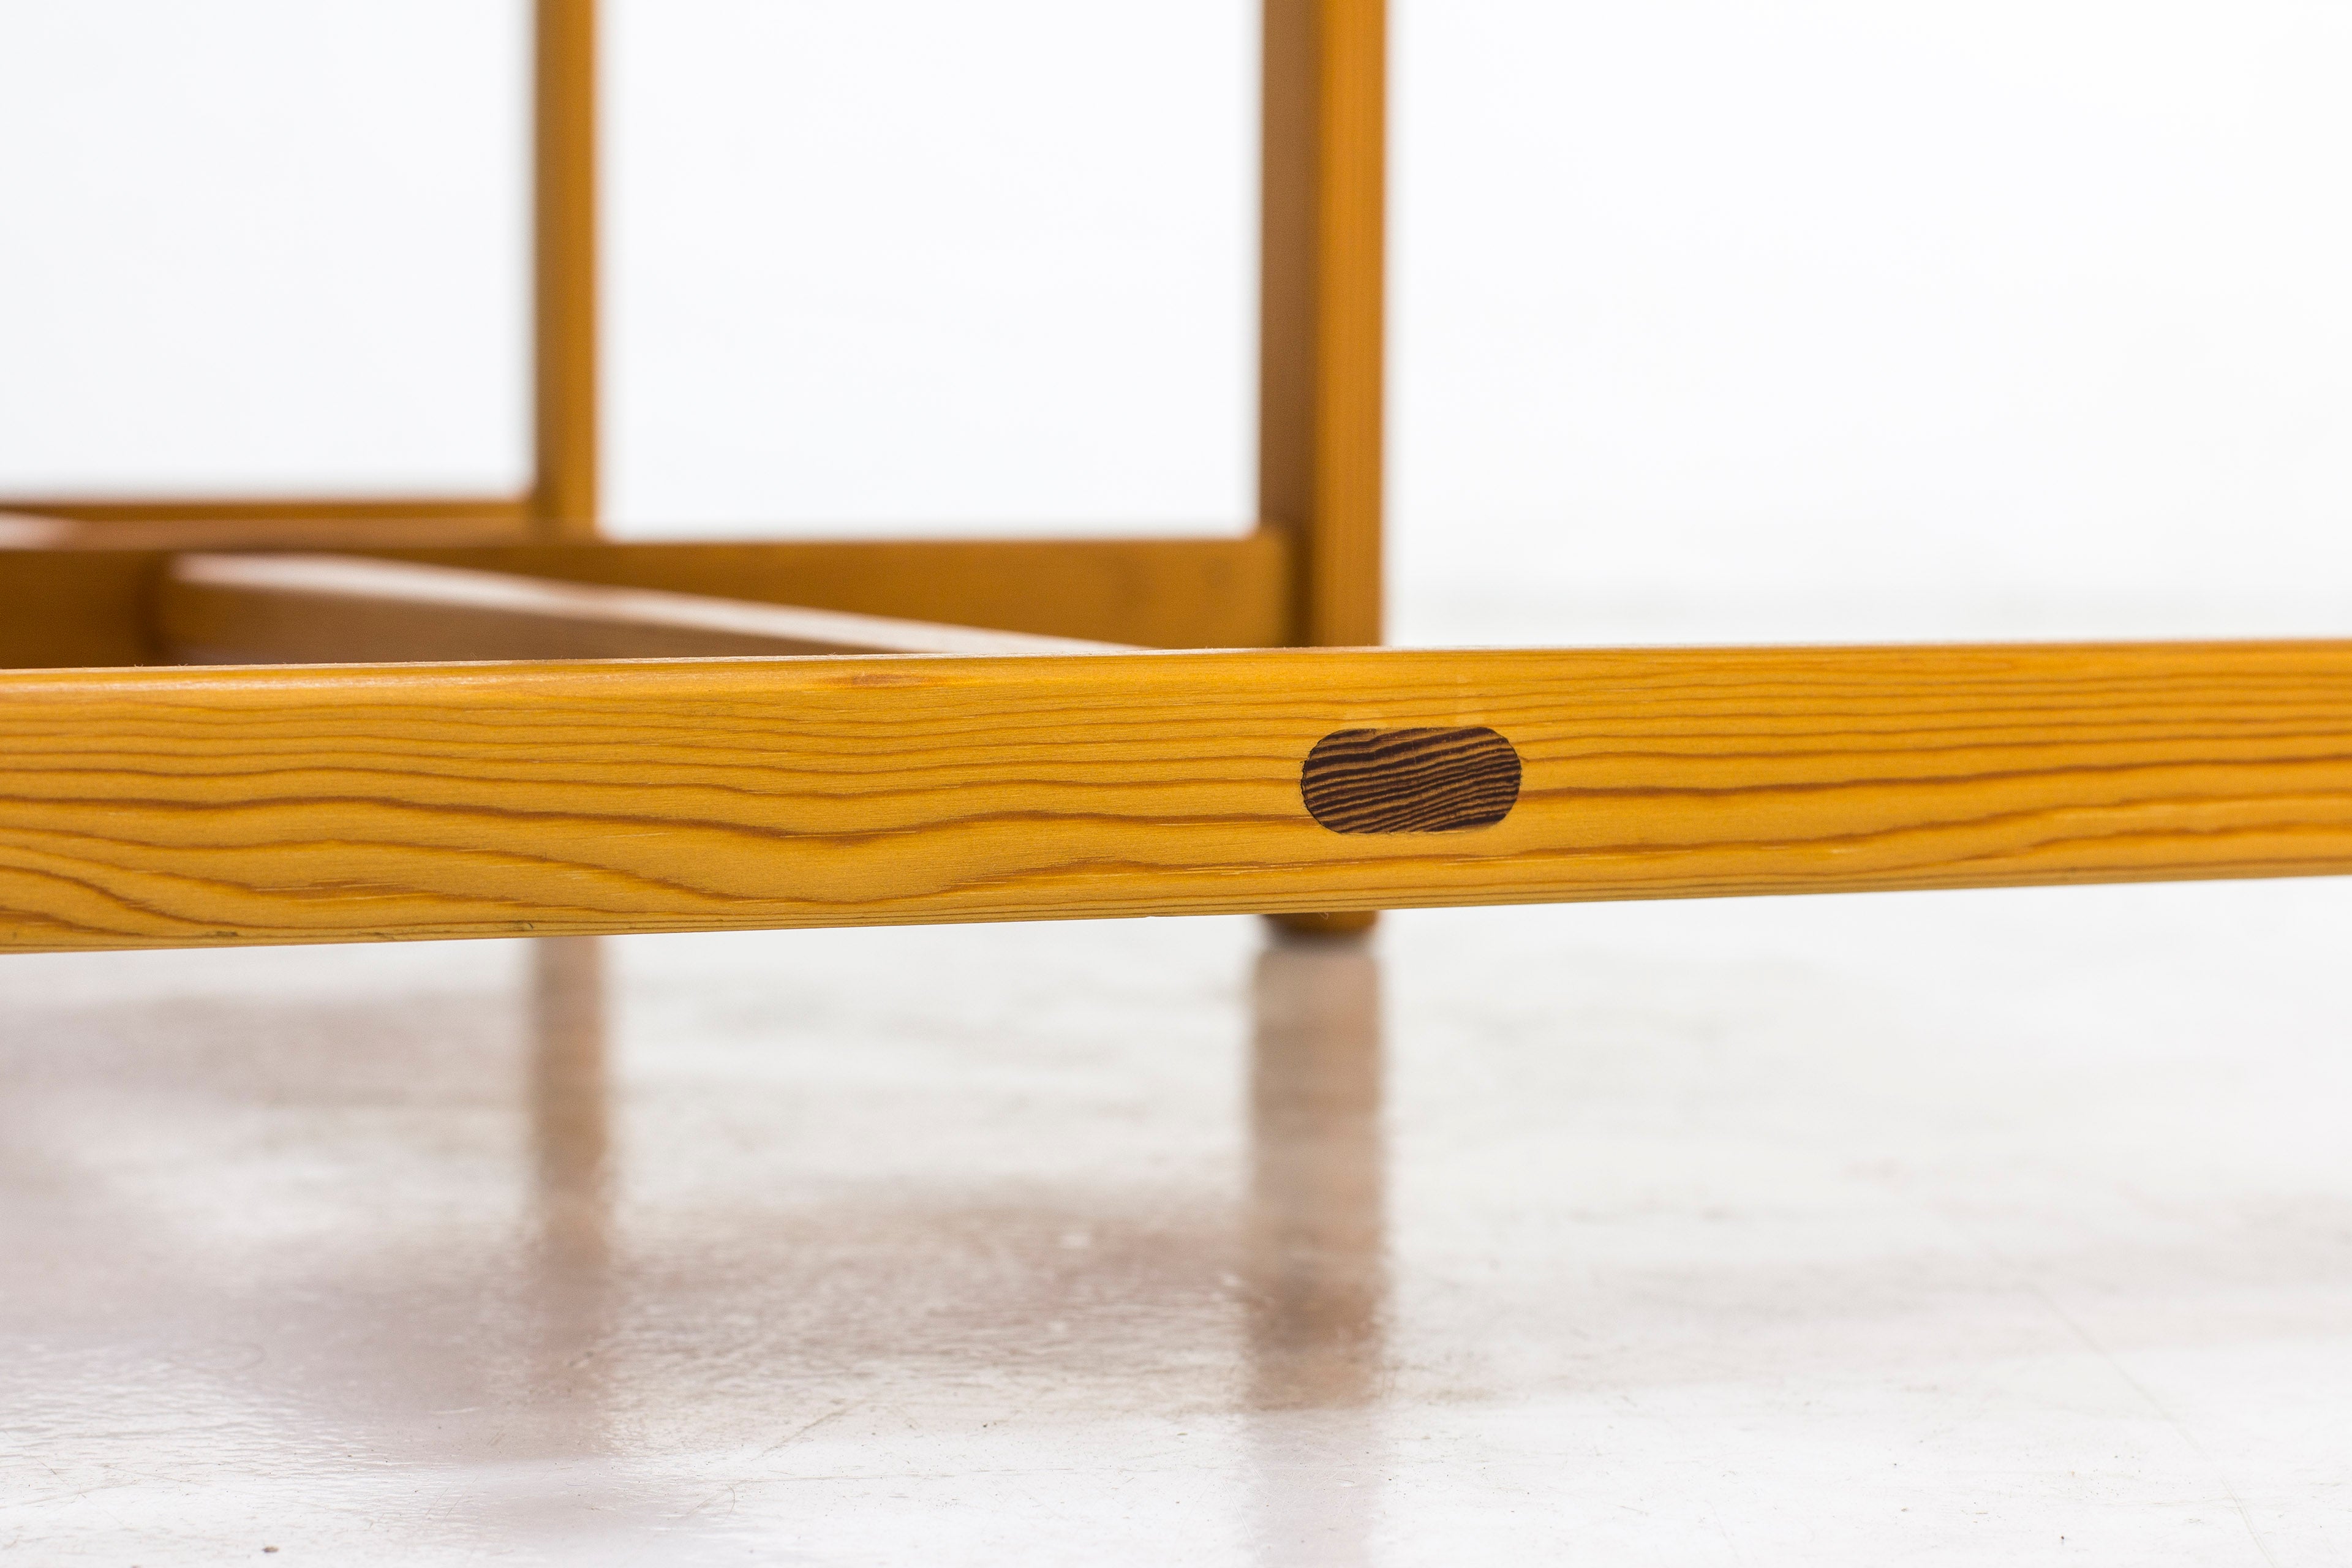 Swedish pine benches from the 1960s